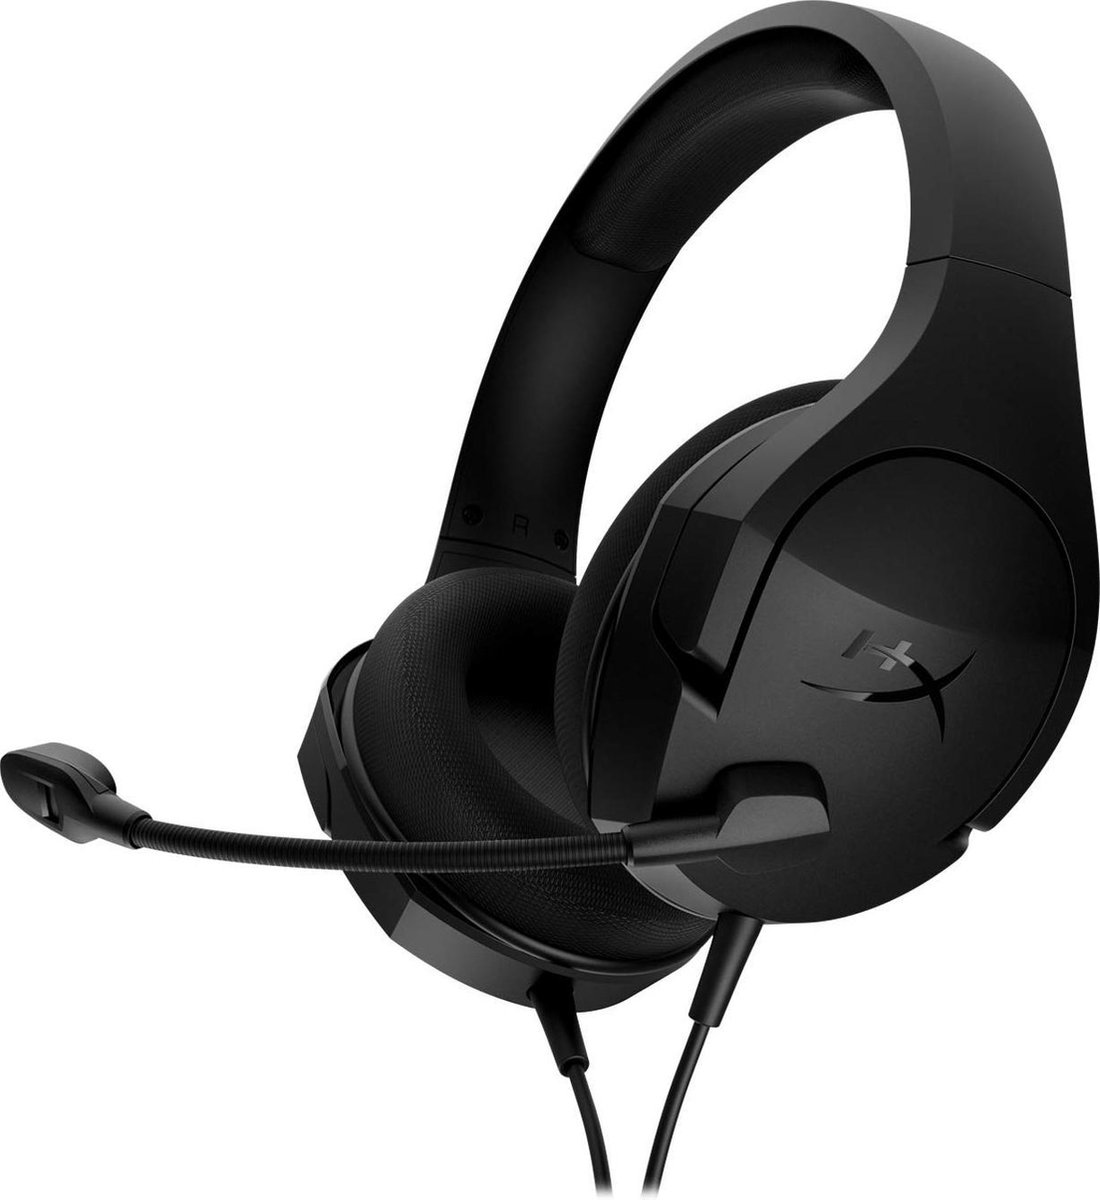 HyperX Cloud Stinger Core PC Gaming Headset - Black (PC/Mac/PS4/Xbox One/Sch/Mobile) - Wit